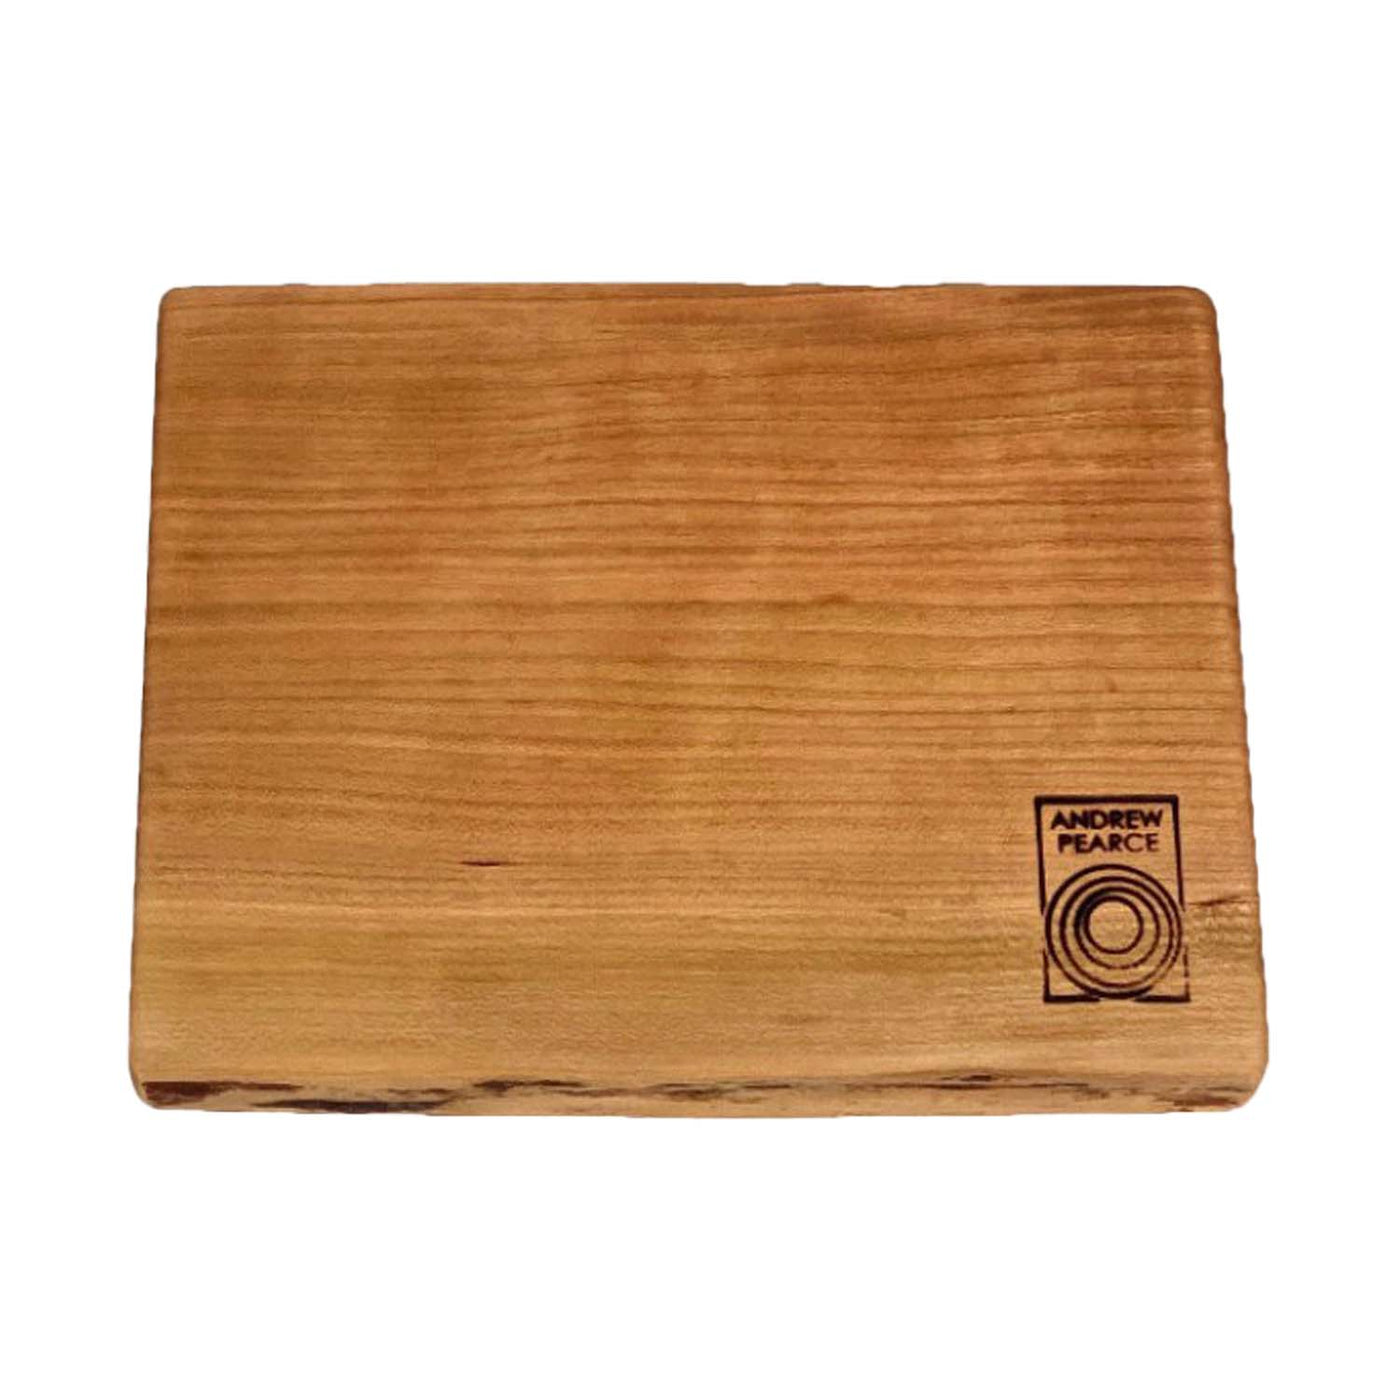 wooden square cutting board with andrew pearce logo in lower right corner